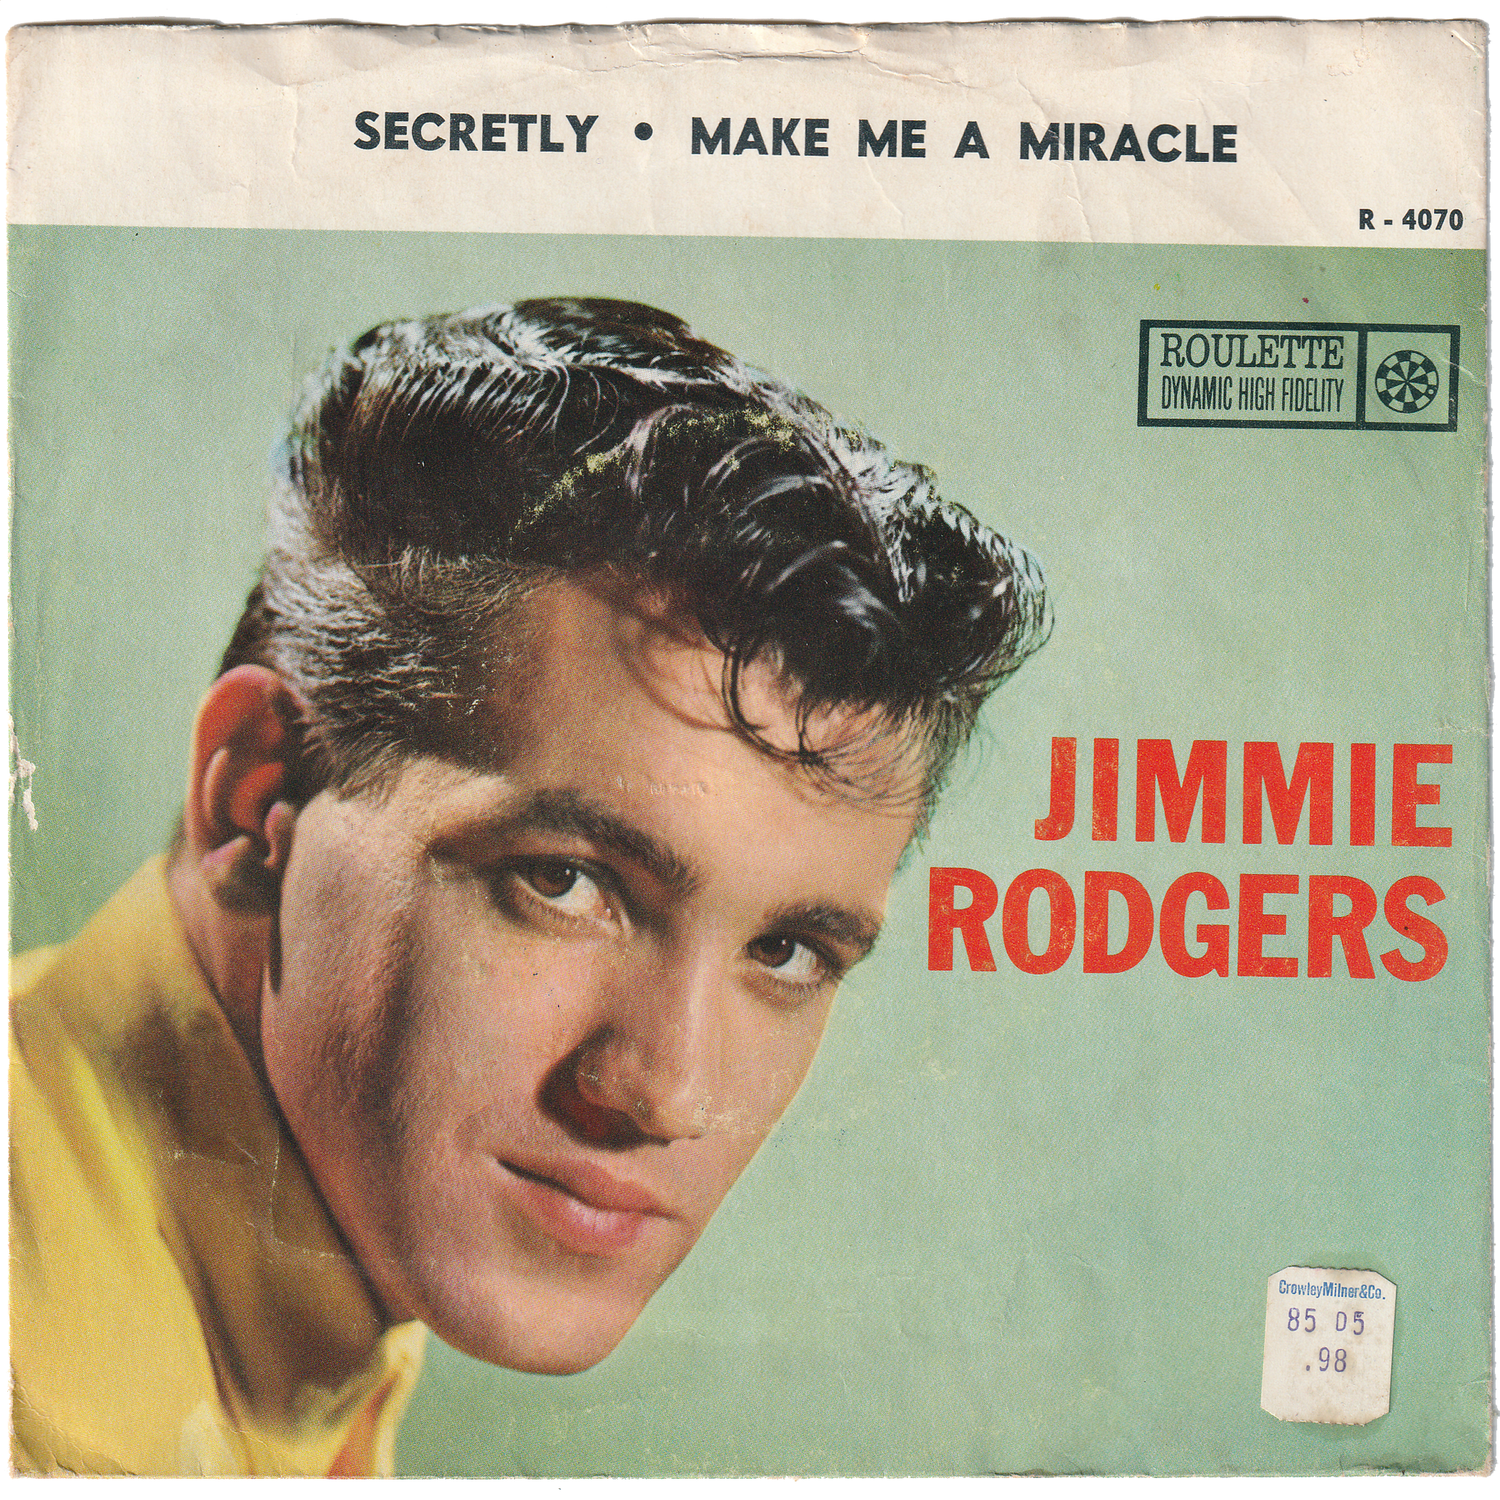 Secretly　(w/PS)　BEAT　RECORDS　–　Rodgers　Me　Miracles　A　NIGHT　Jimmie　Make